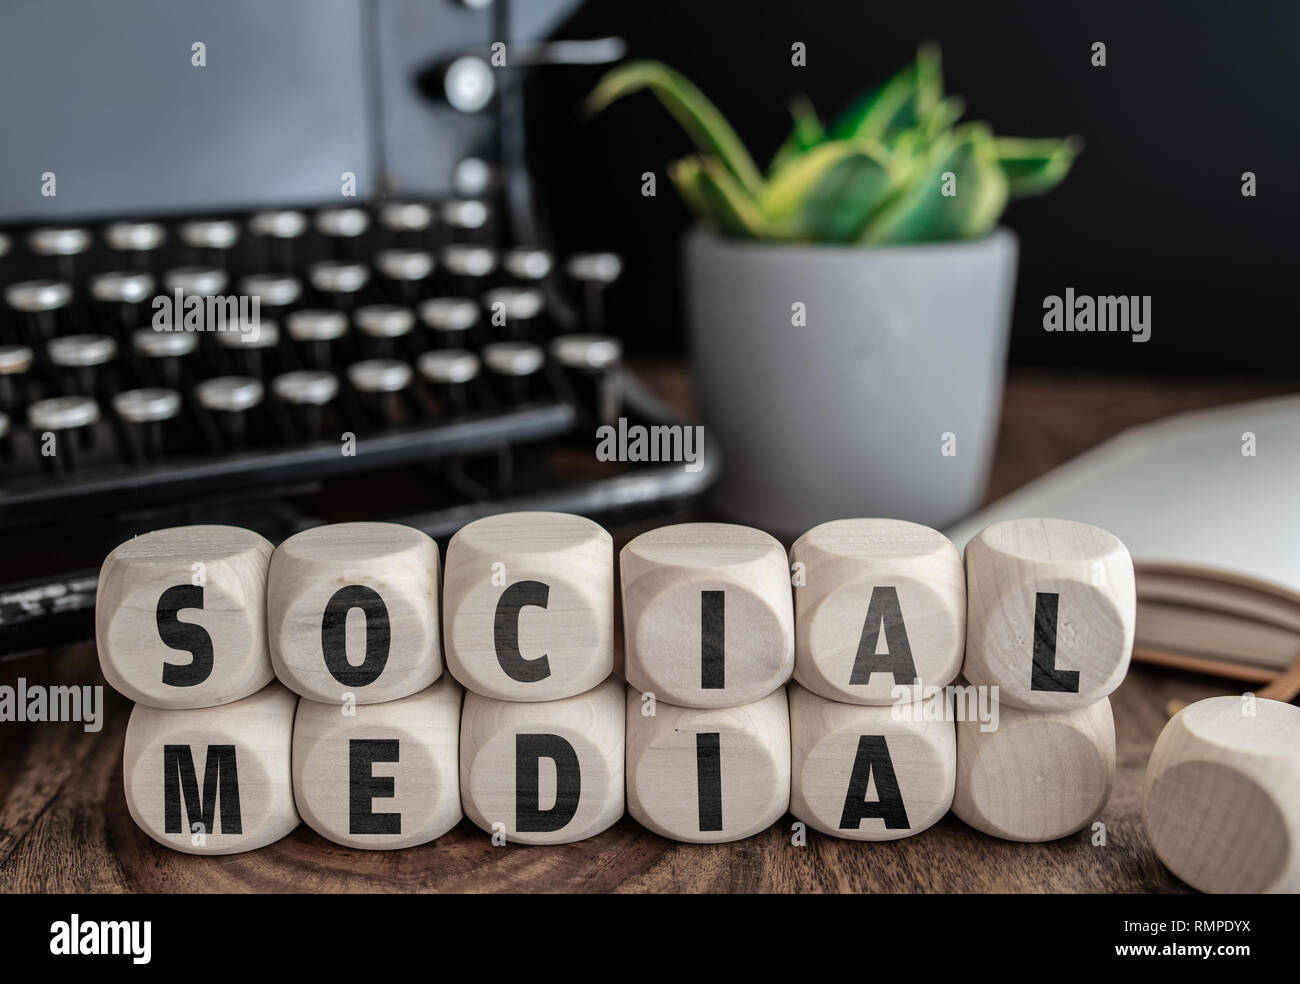 words SOCIAL MEDIA on wooden blocks against vintage typewriter and potted plant on desk Stock Photo